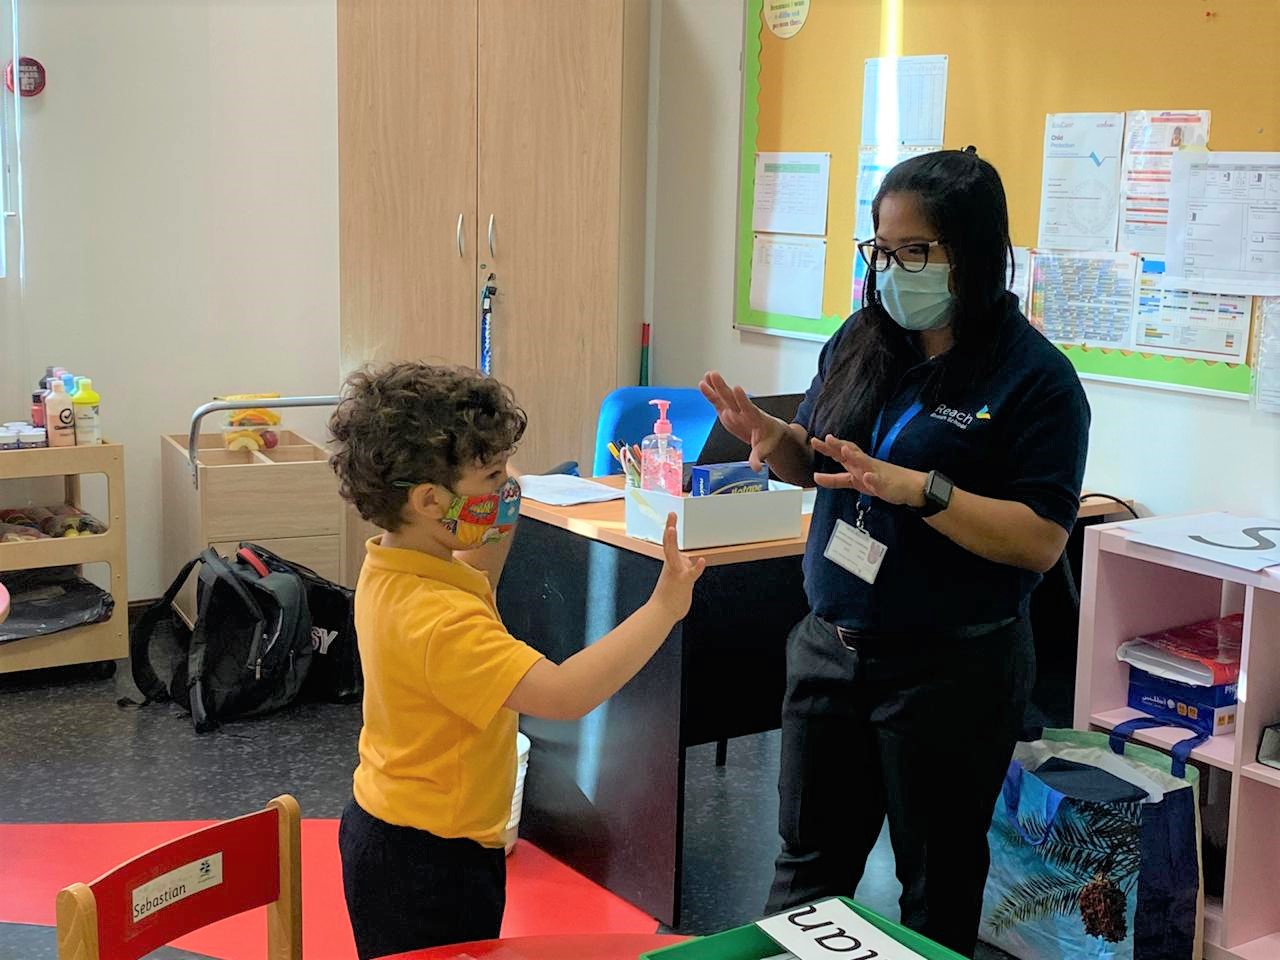 Experience a Safe Return to Learning at These Abu Dhabi Schools